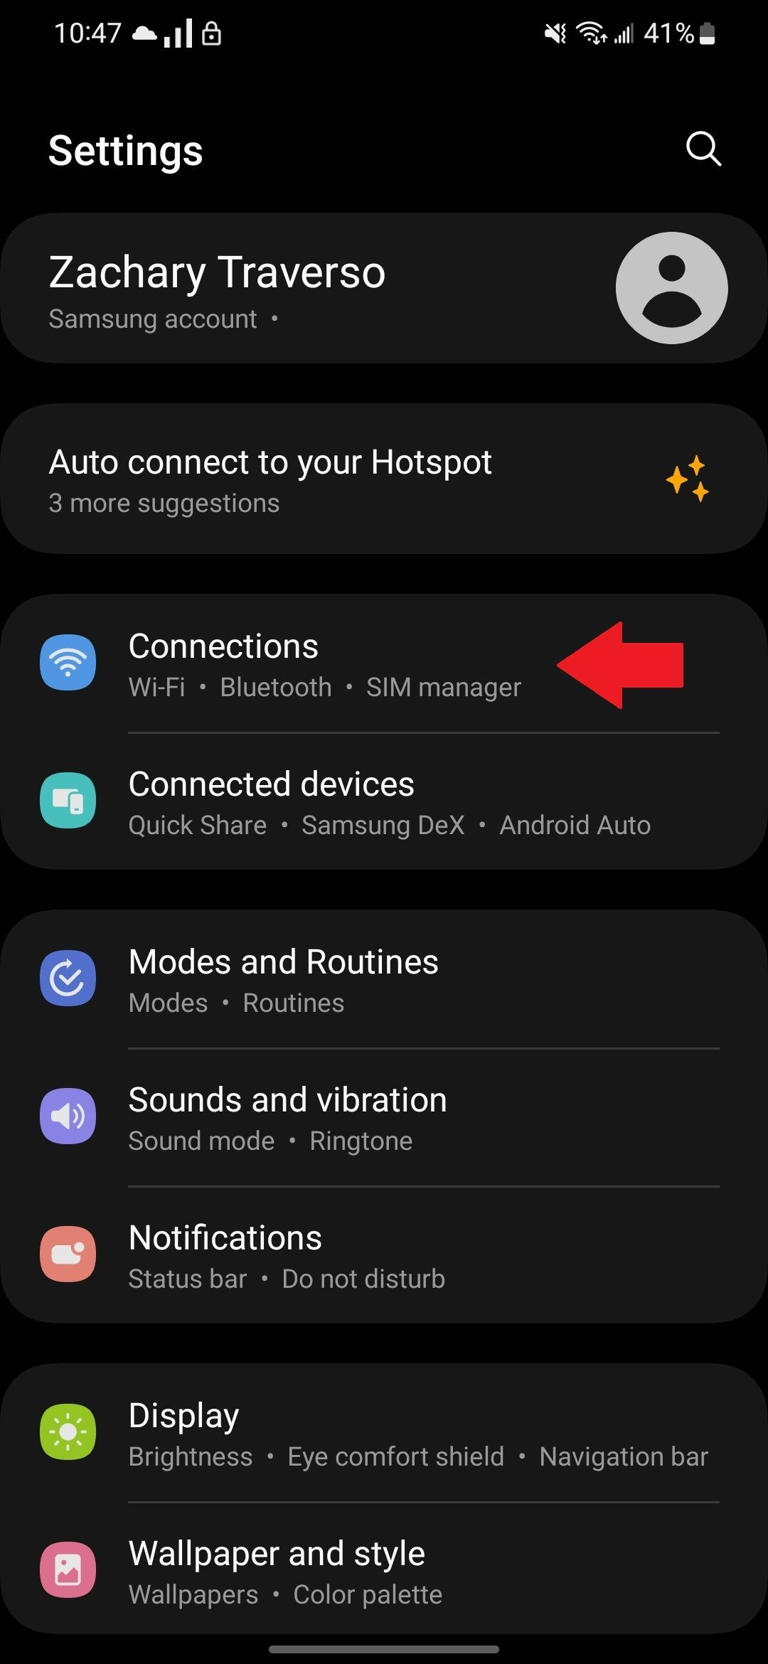 The Samsung Settings app with a red arrow pointing to the Connections section